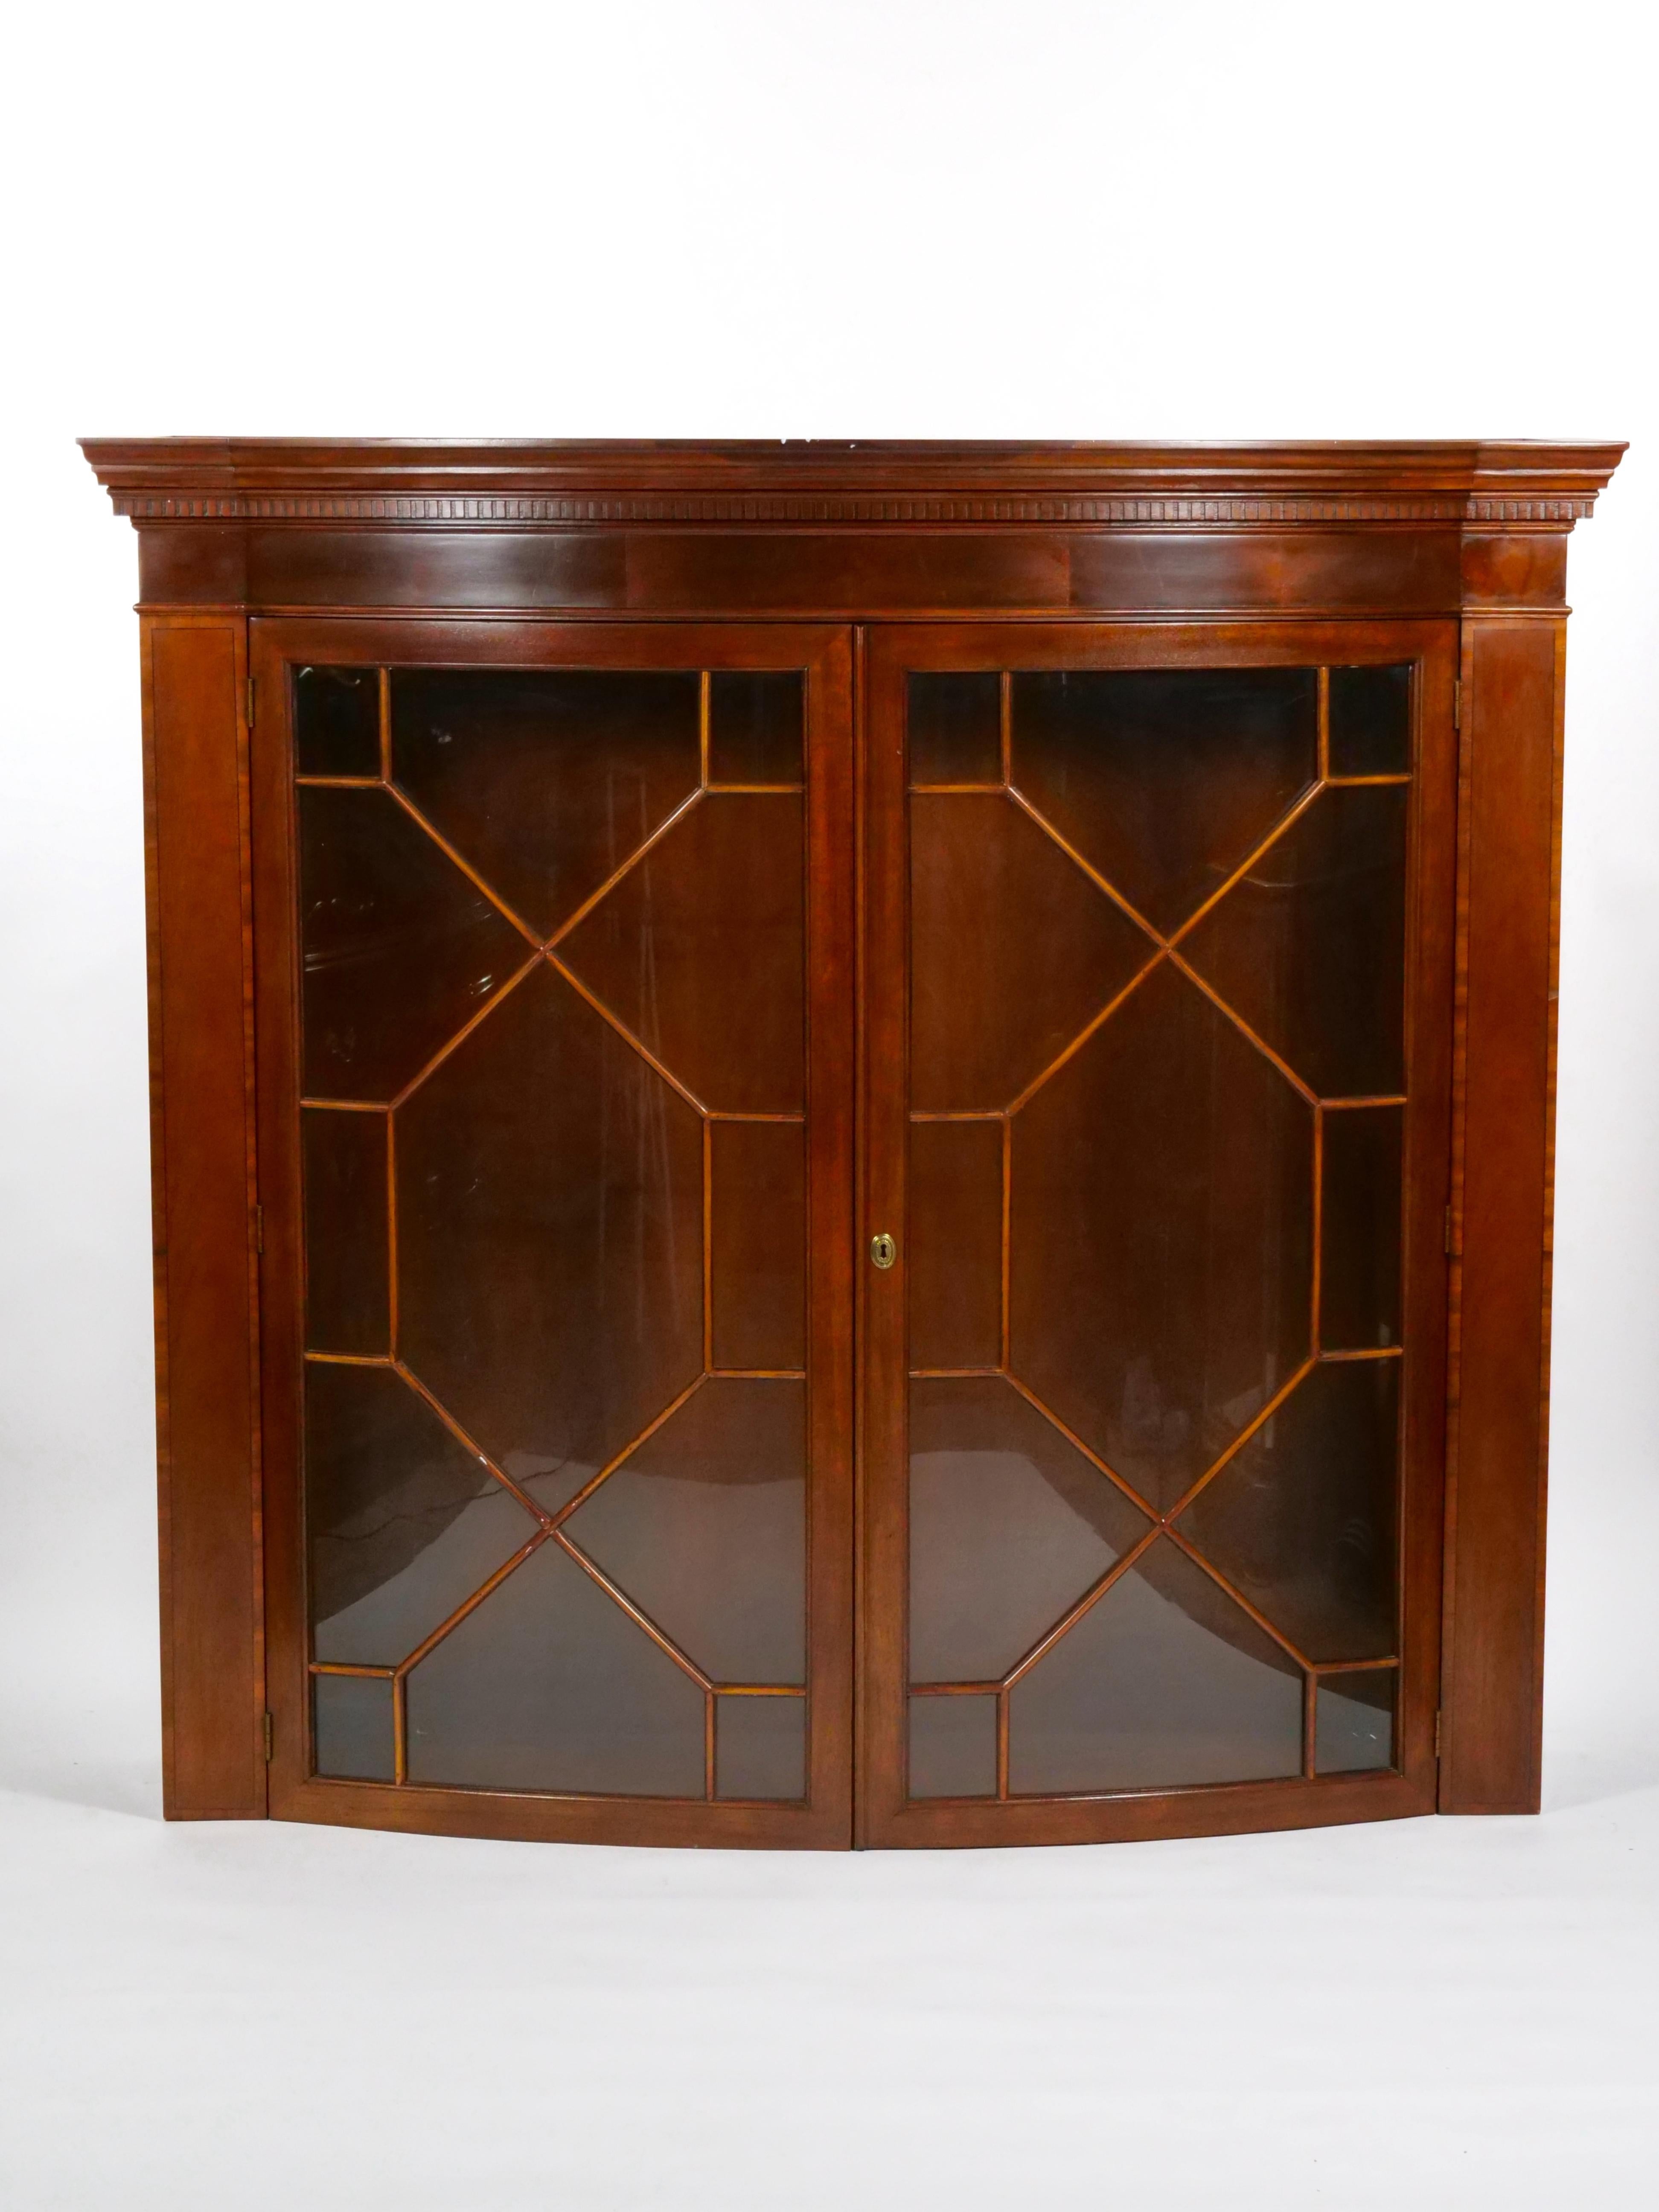 Add a touch of historical charm to your space with this North American Early 20th Century Mahogany Wood Demilune Shape China Cabinet, a remarkable piece of furniture that reflects the craftsmanship and design of the era. The charleston inlaid and